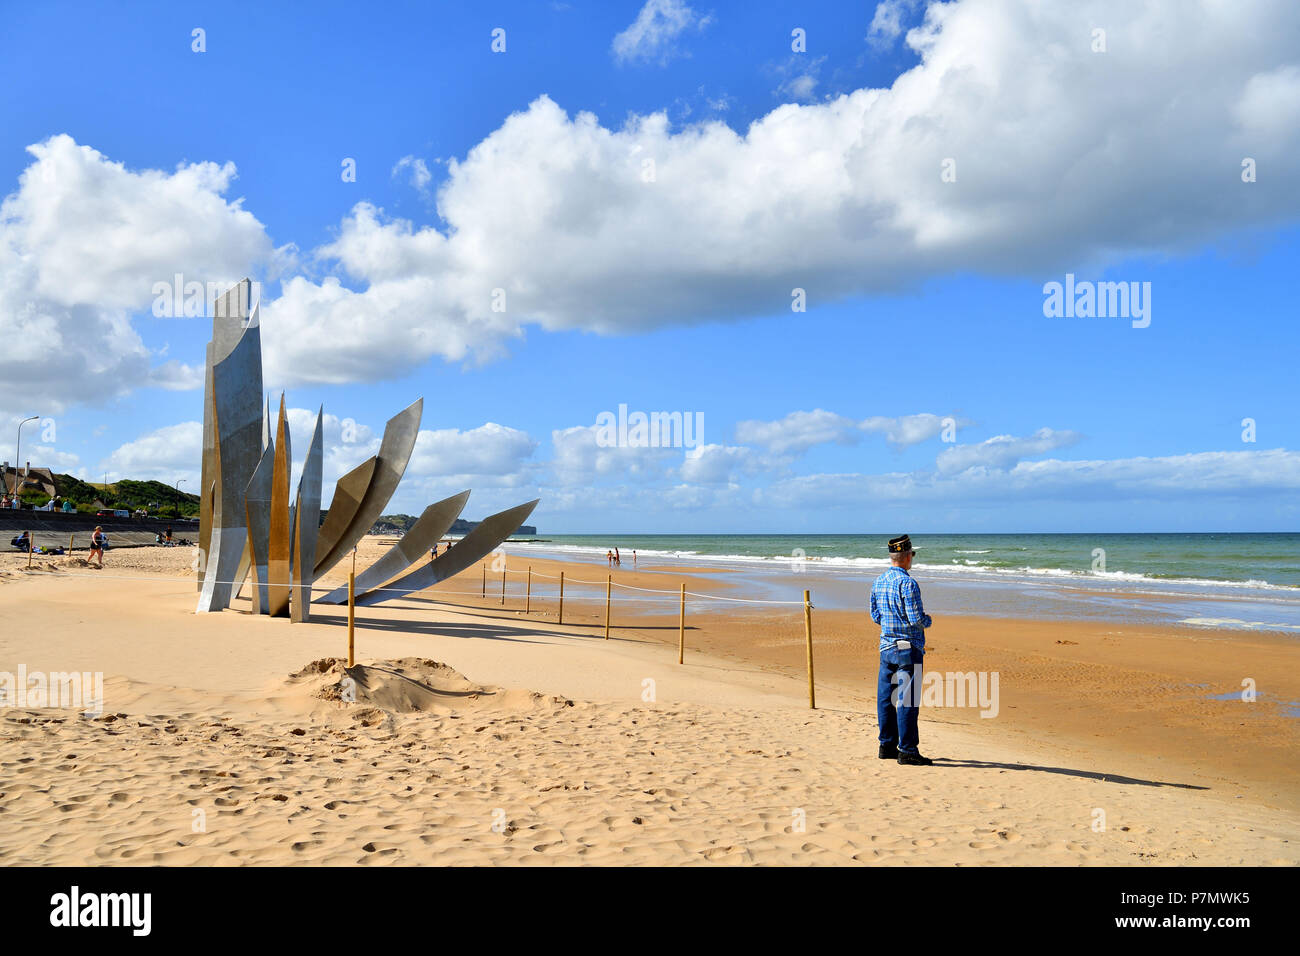 France, Calvados, plage de Vierville sur Mer (Omaha Beach), Les Braves sculpture dedicated to the 60th anniversary of the Normandy landings, American veteran collecting some sand on the beach Stock Photo